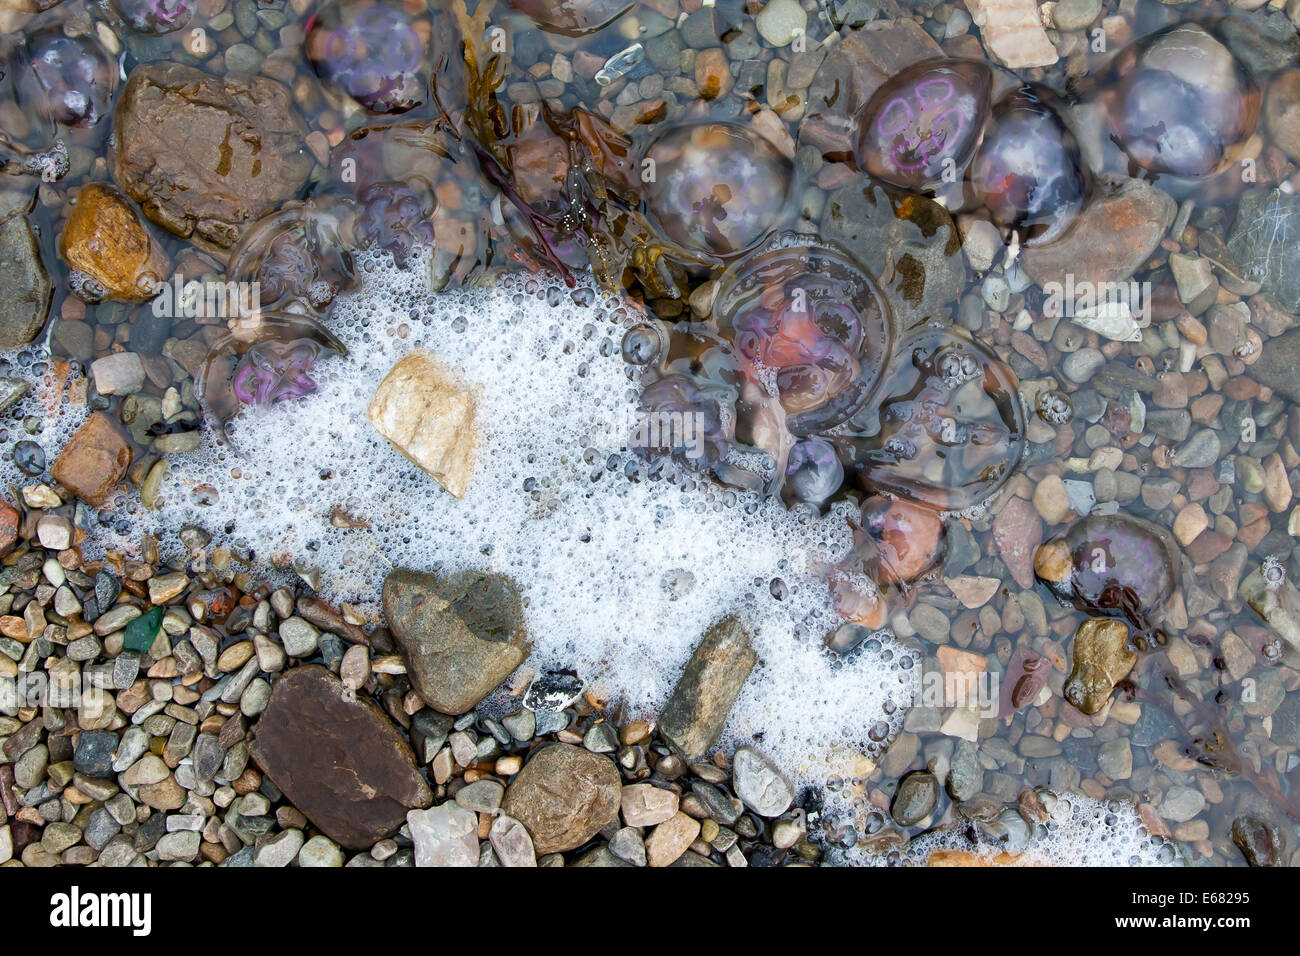 Small jellyfish washing up on a beach in Scotland Stock Photo